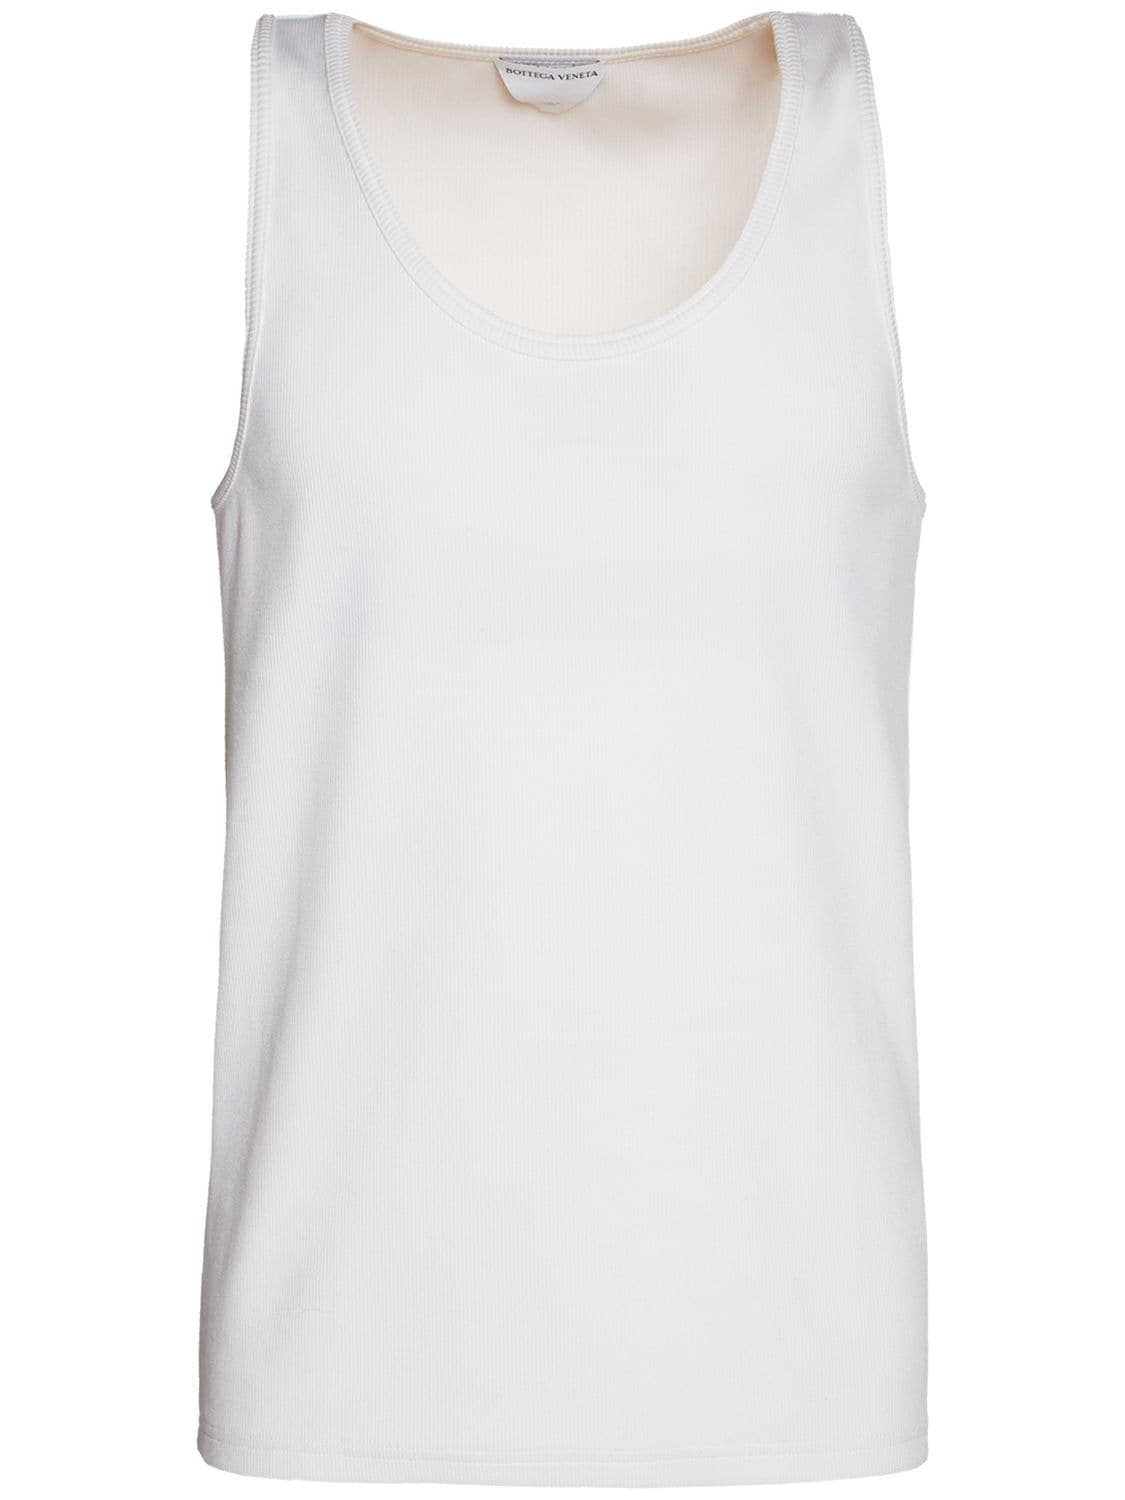 Image of Cotton Blend Tank Top